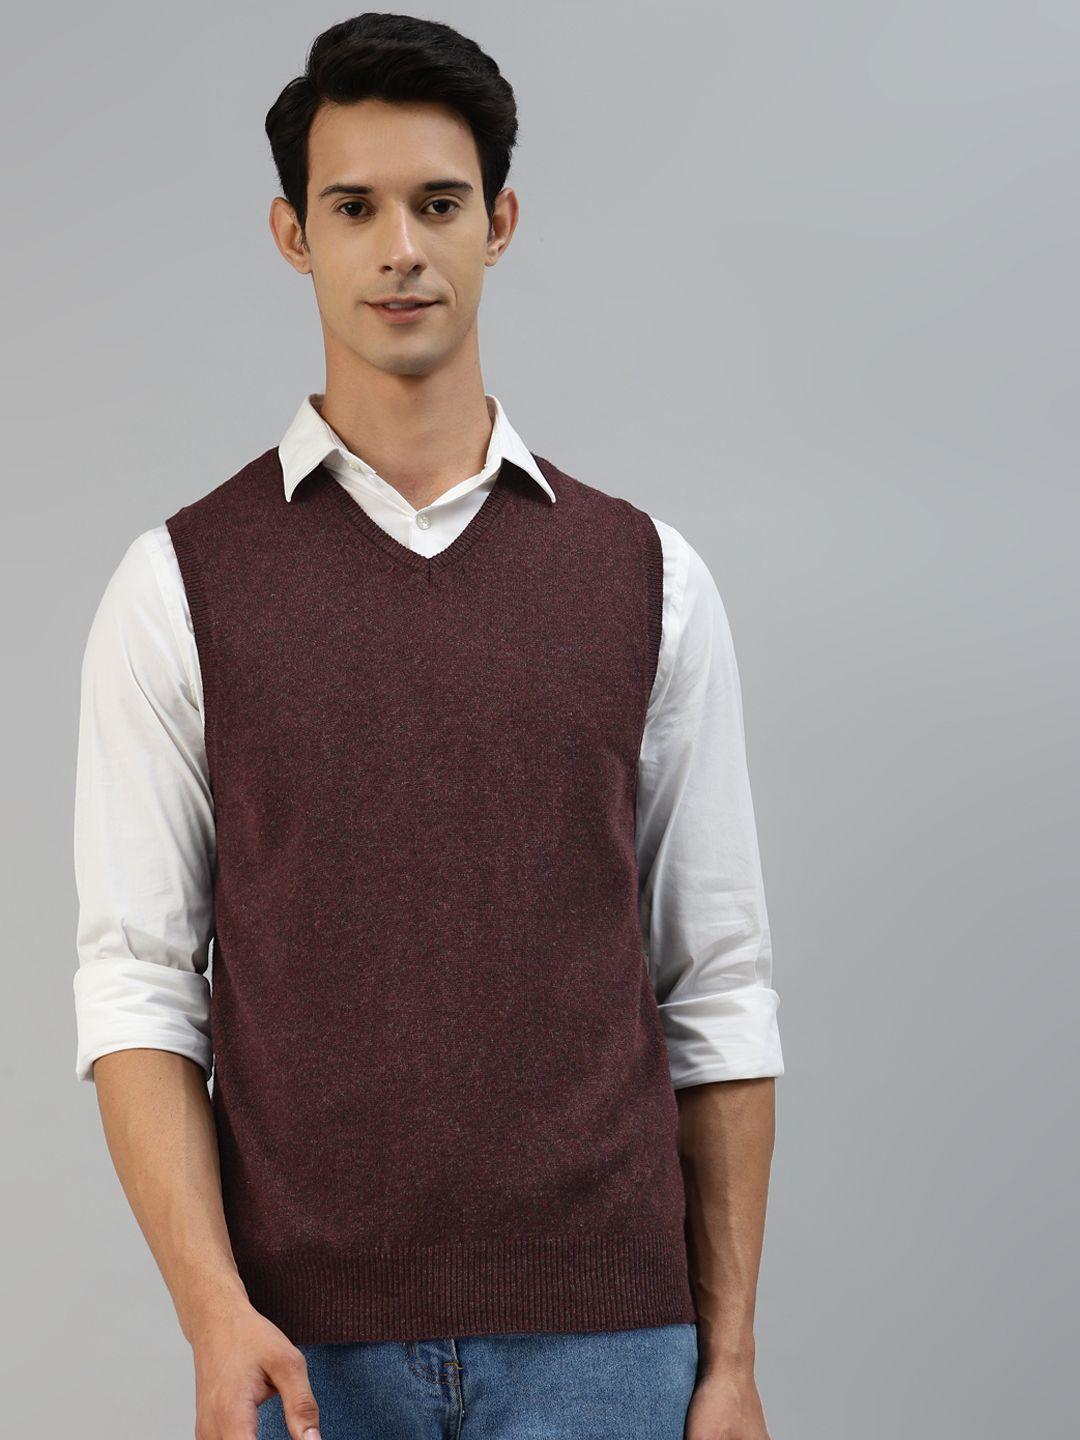 marks & spencer men maroon solid pure wool sweater vest